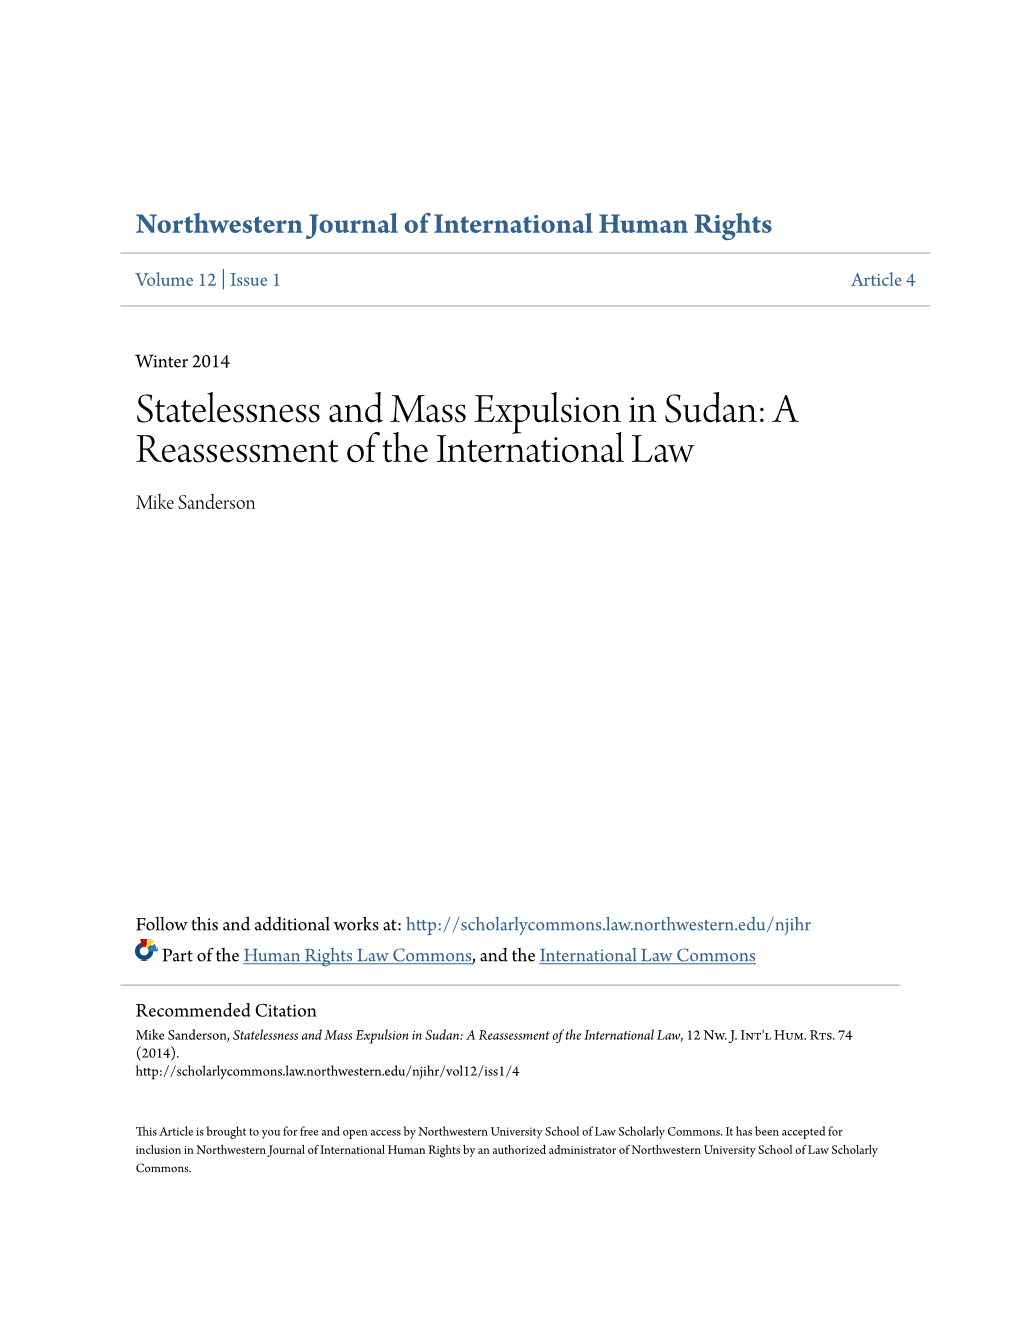 Statelessness and Mass Expulsion in Sudan: a Reassessment of the International Law Mike Sanderson